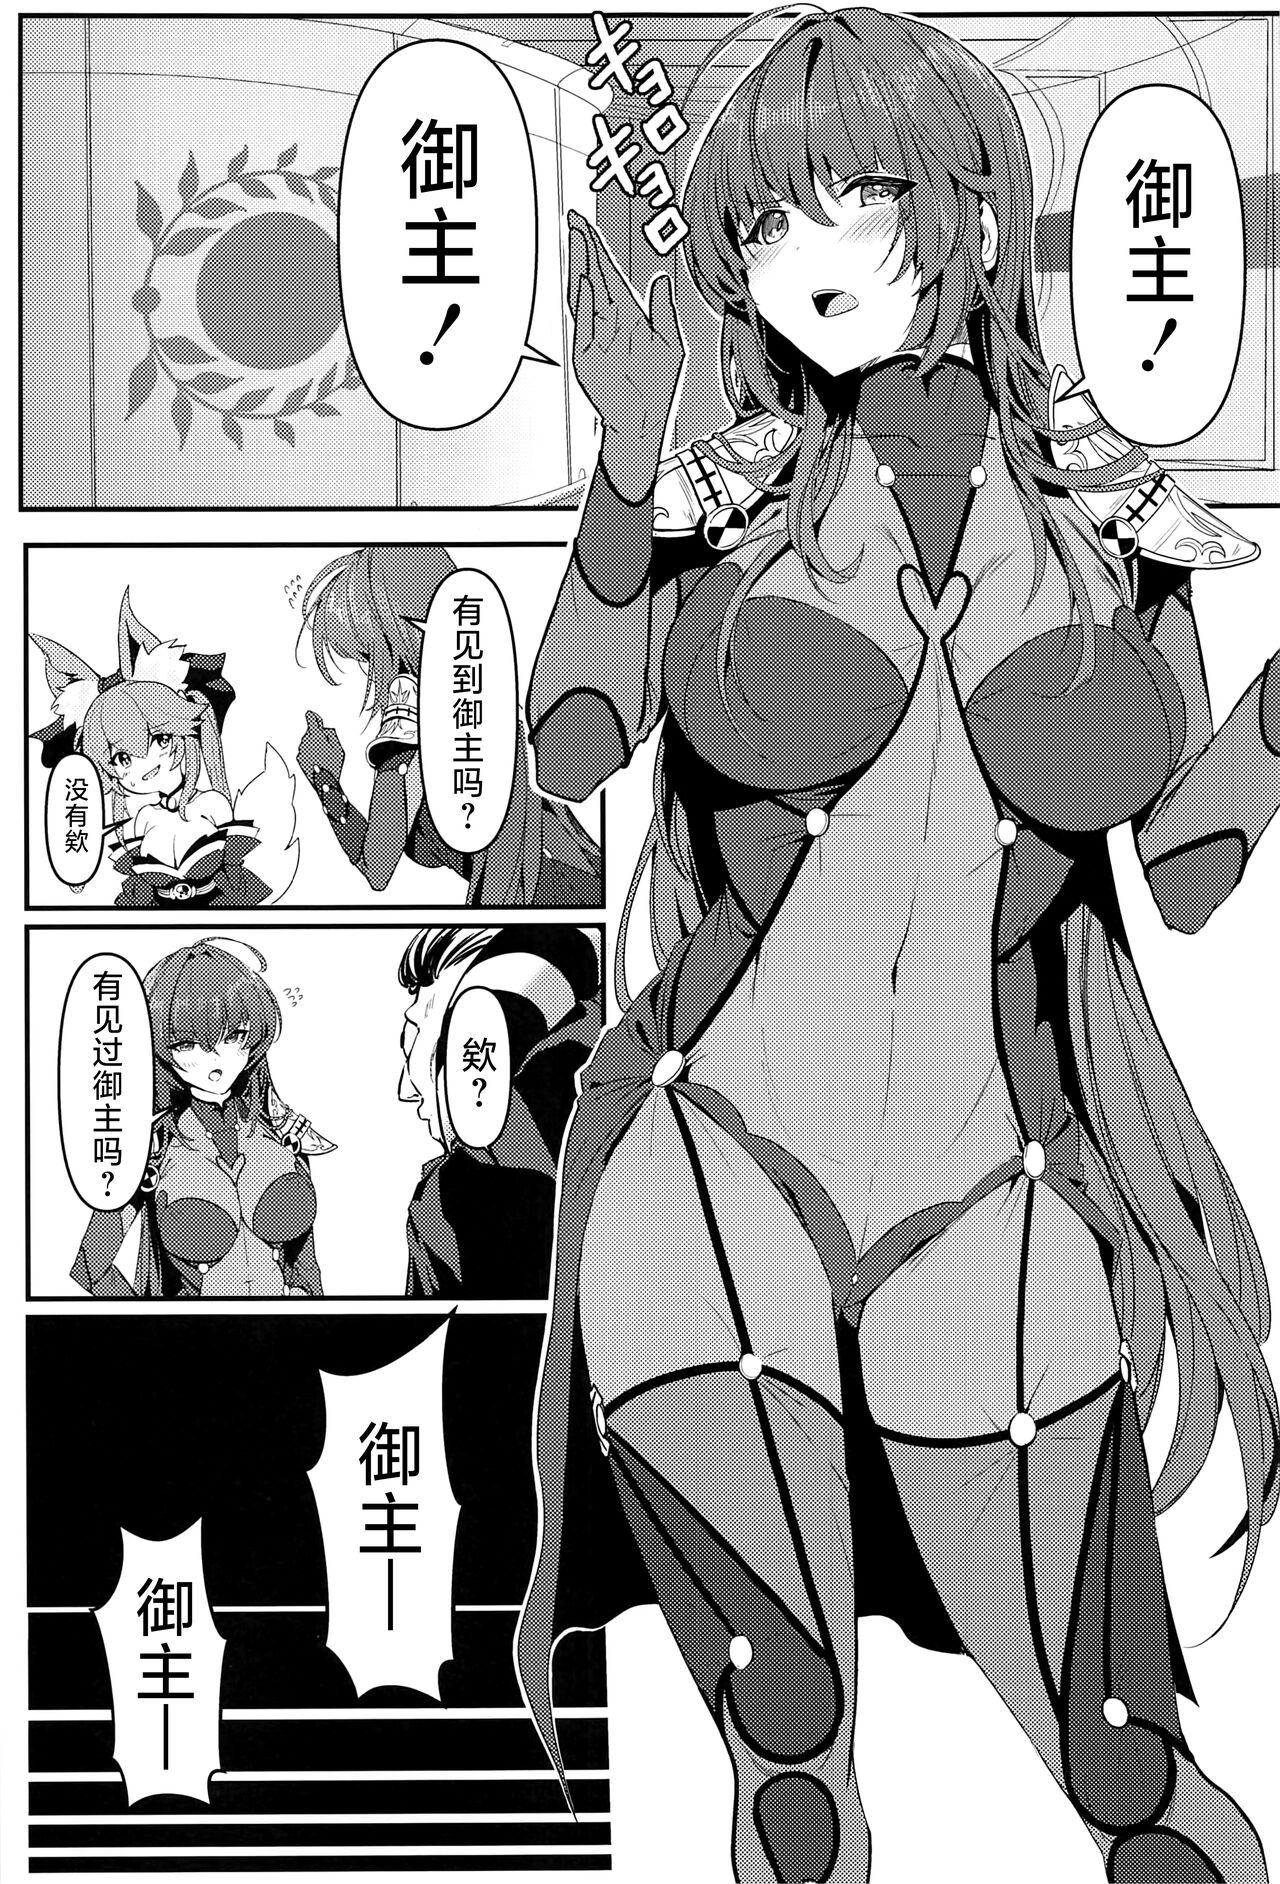 Heels TRUE COLOR - Fate grand order Mofos - Page 2